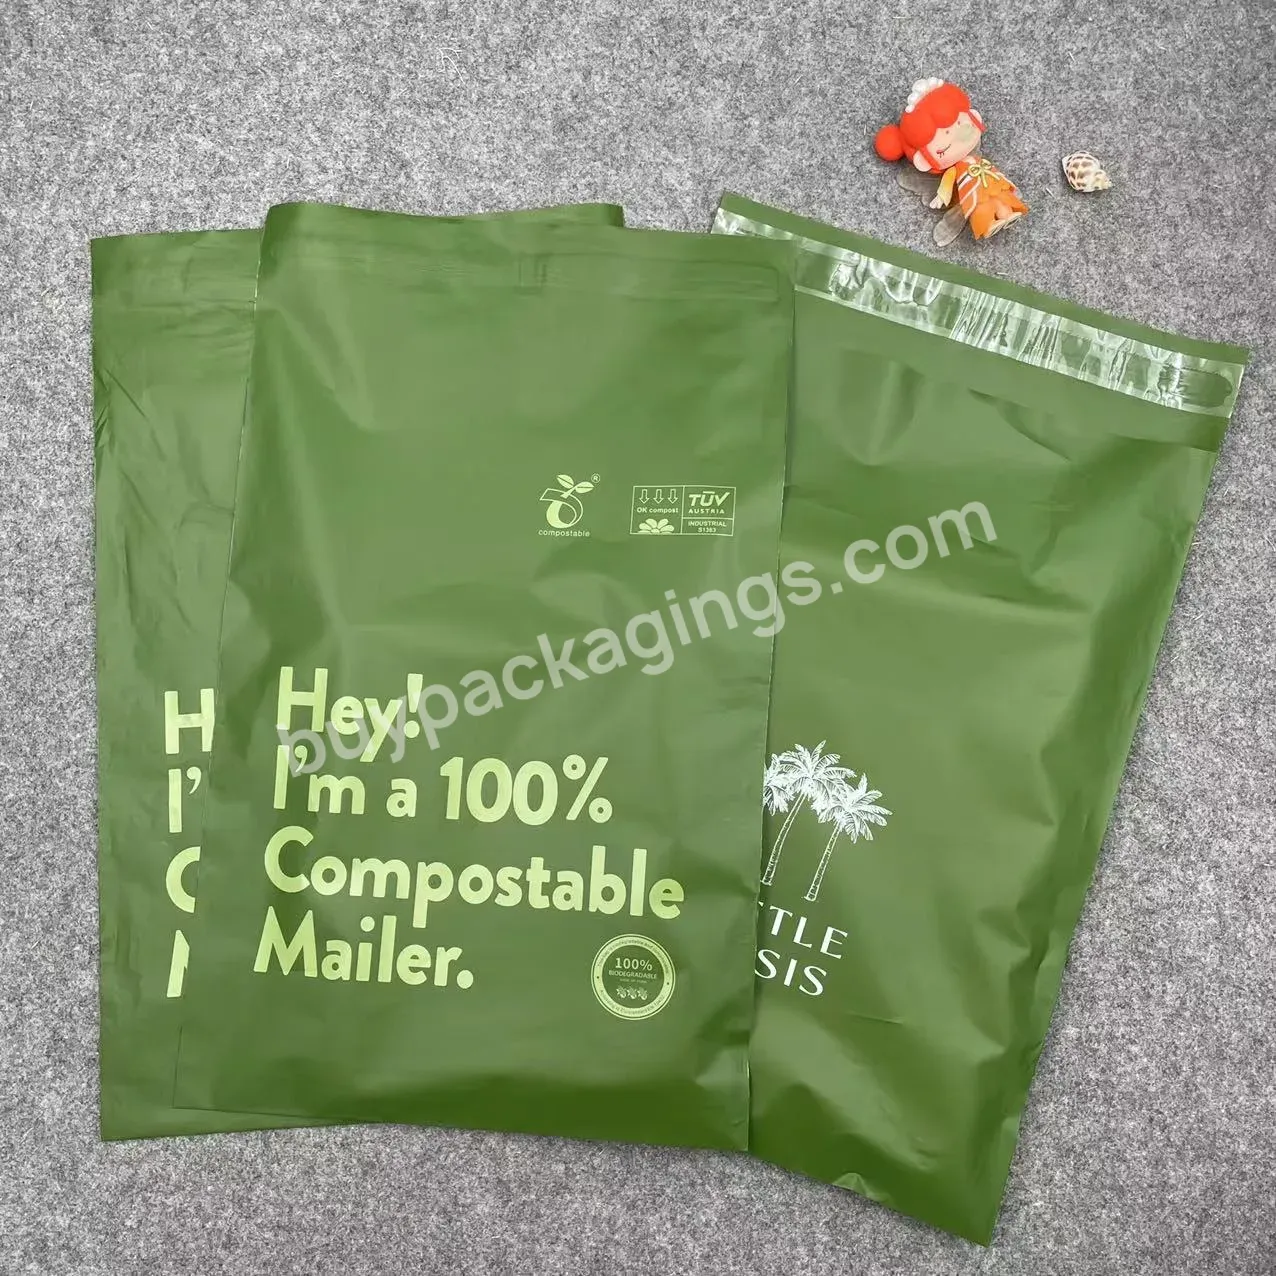 New Arrival Custom Logo Printed 100% Biodegradable Compostable Green Packaging Poly Mailer Shipping Mailing Bags For Clothing - Buy Custom Logo Printed Biodegradable Mailing Bags,100% Biodegradable Compostable Shipping Bags,Shipping Bags For Clothing.